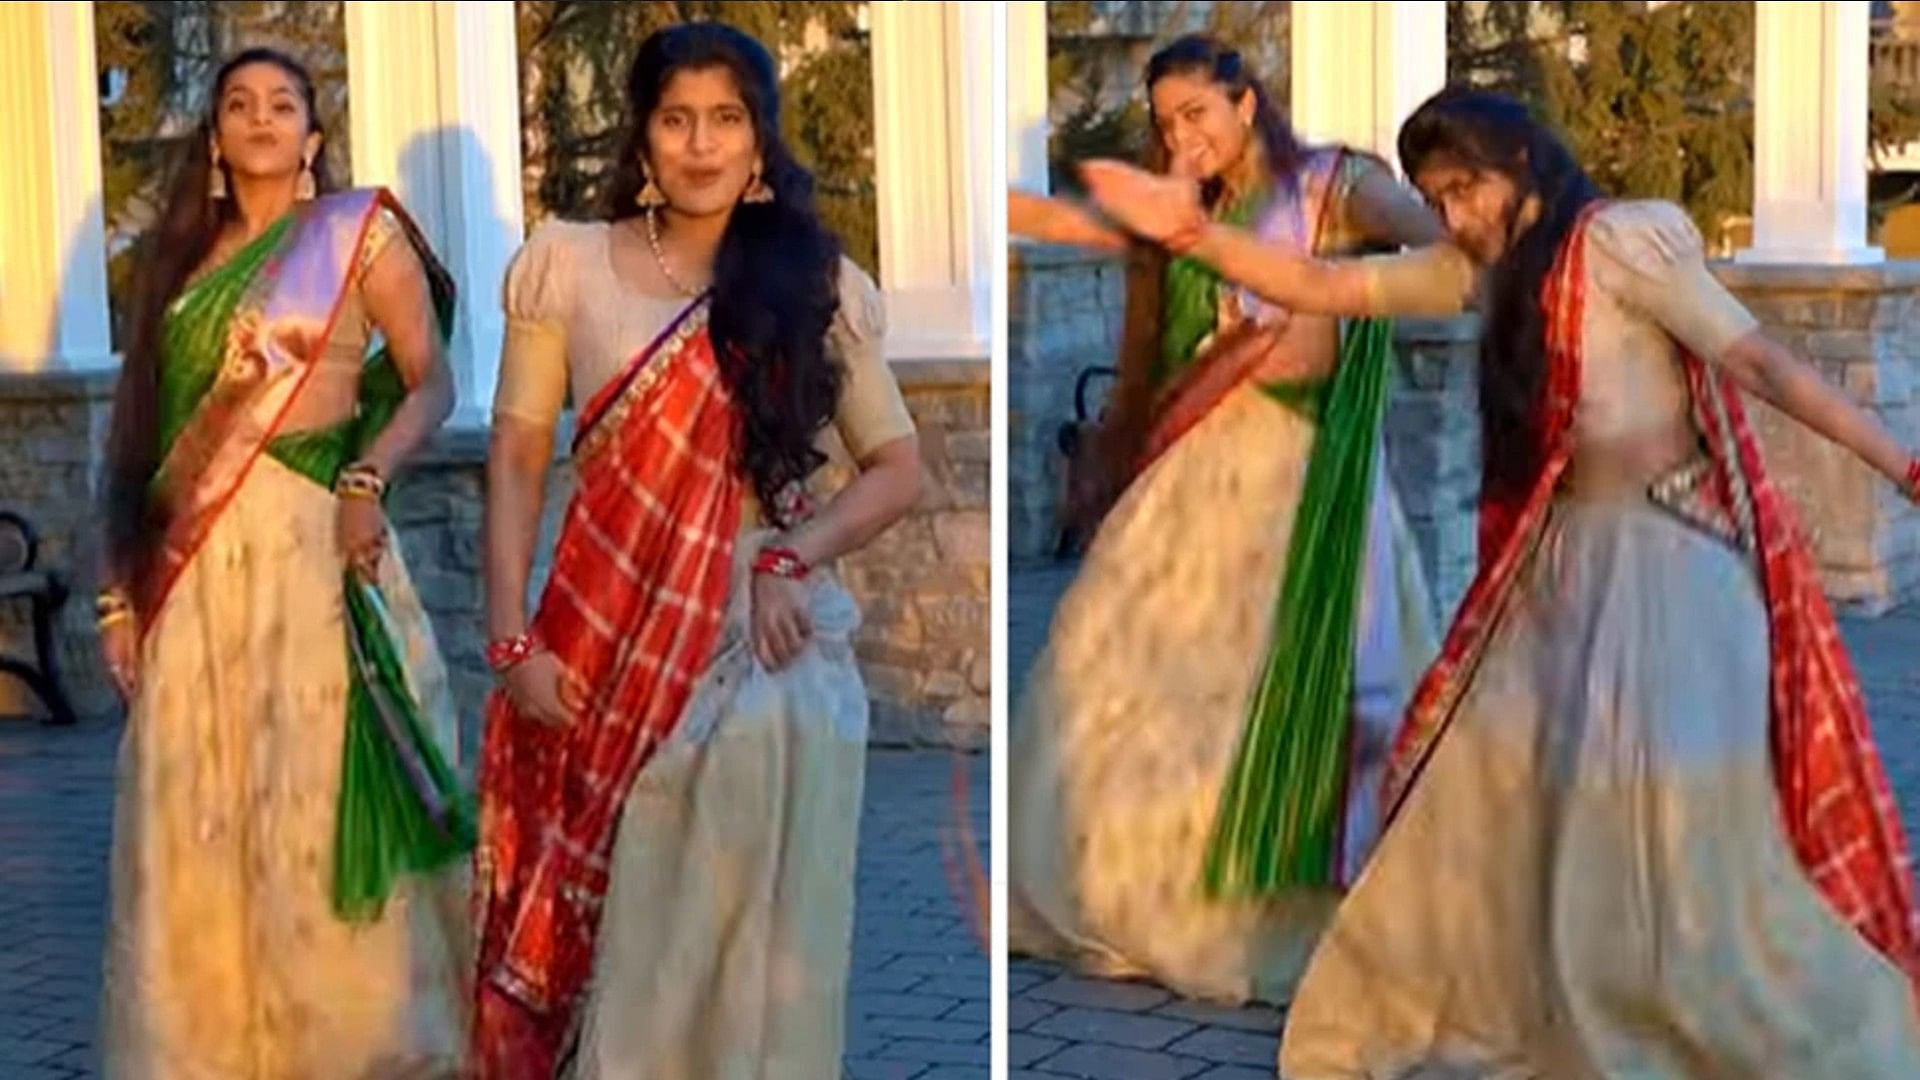 Dance Video american girls wearing traditional dress did such a wonderful dance on the song of pushpa